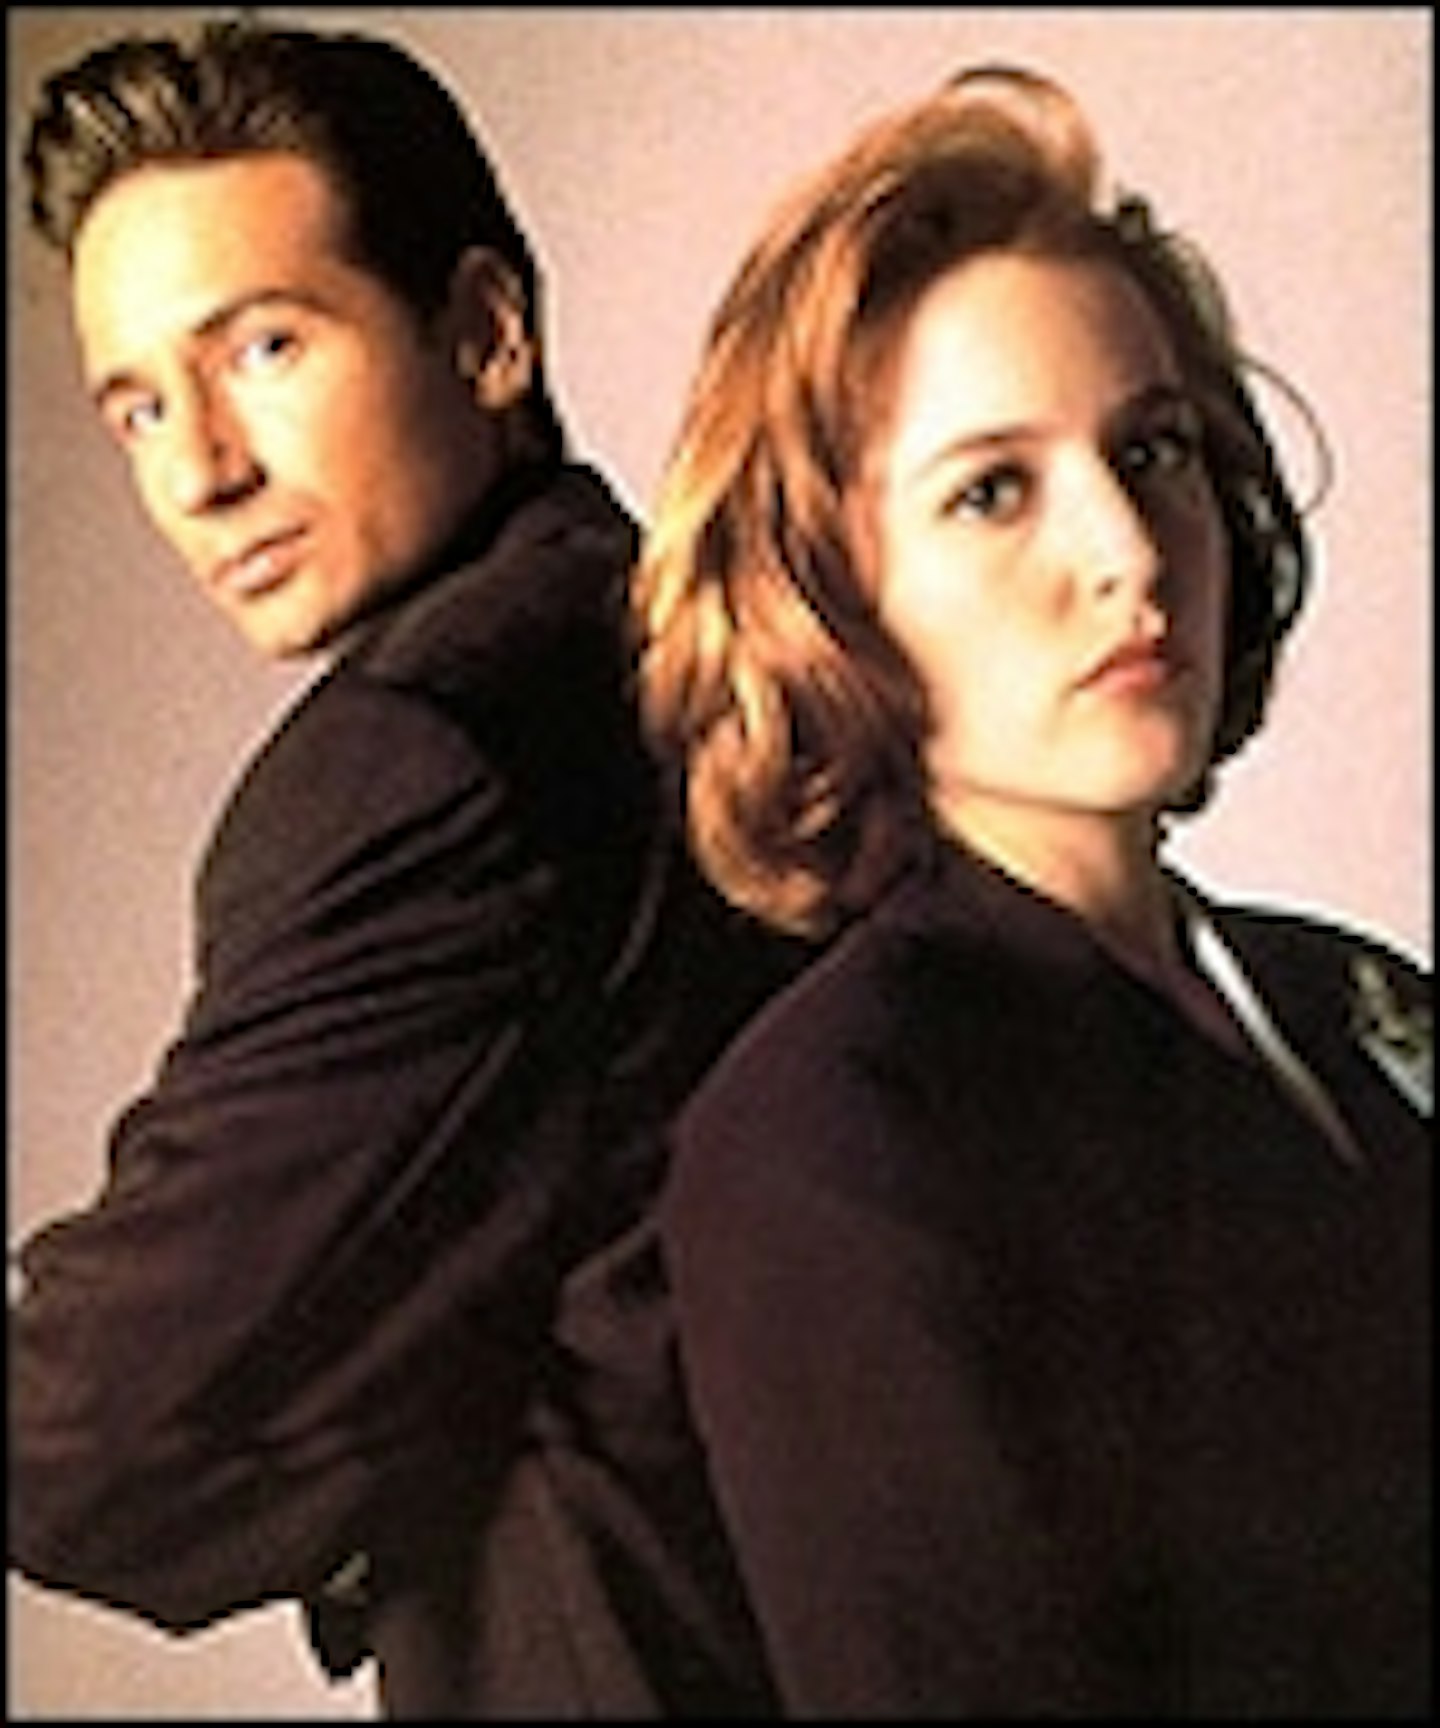 Two More For X-Files Sequel